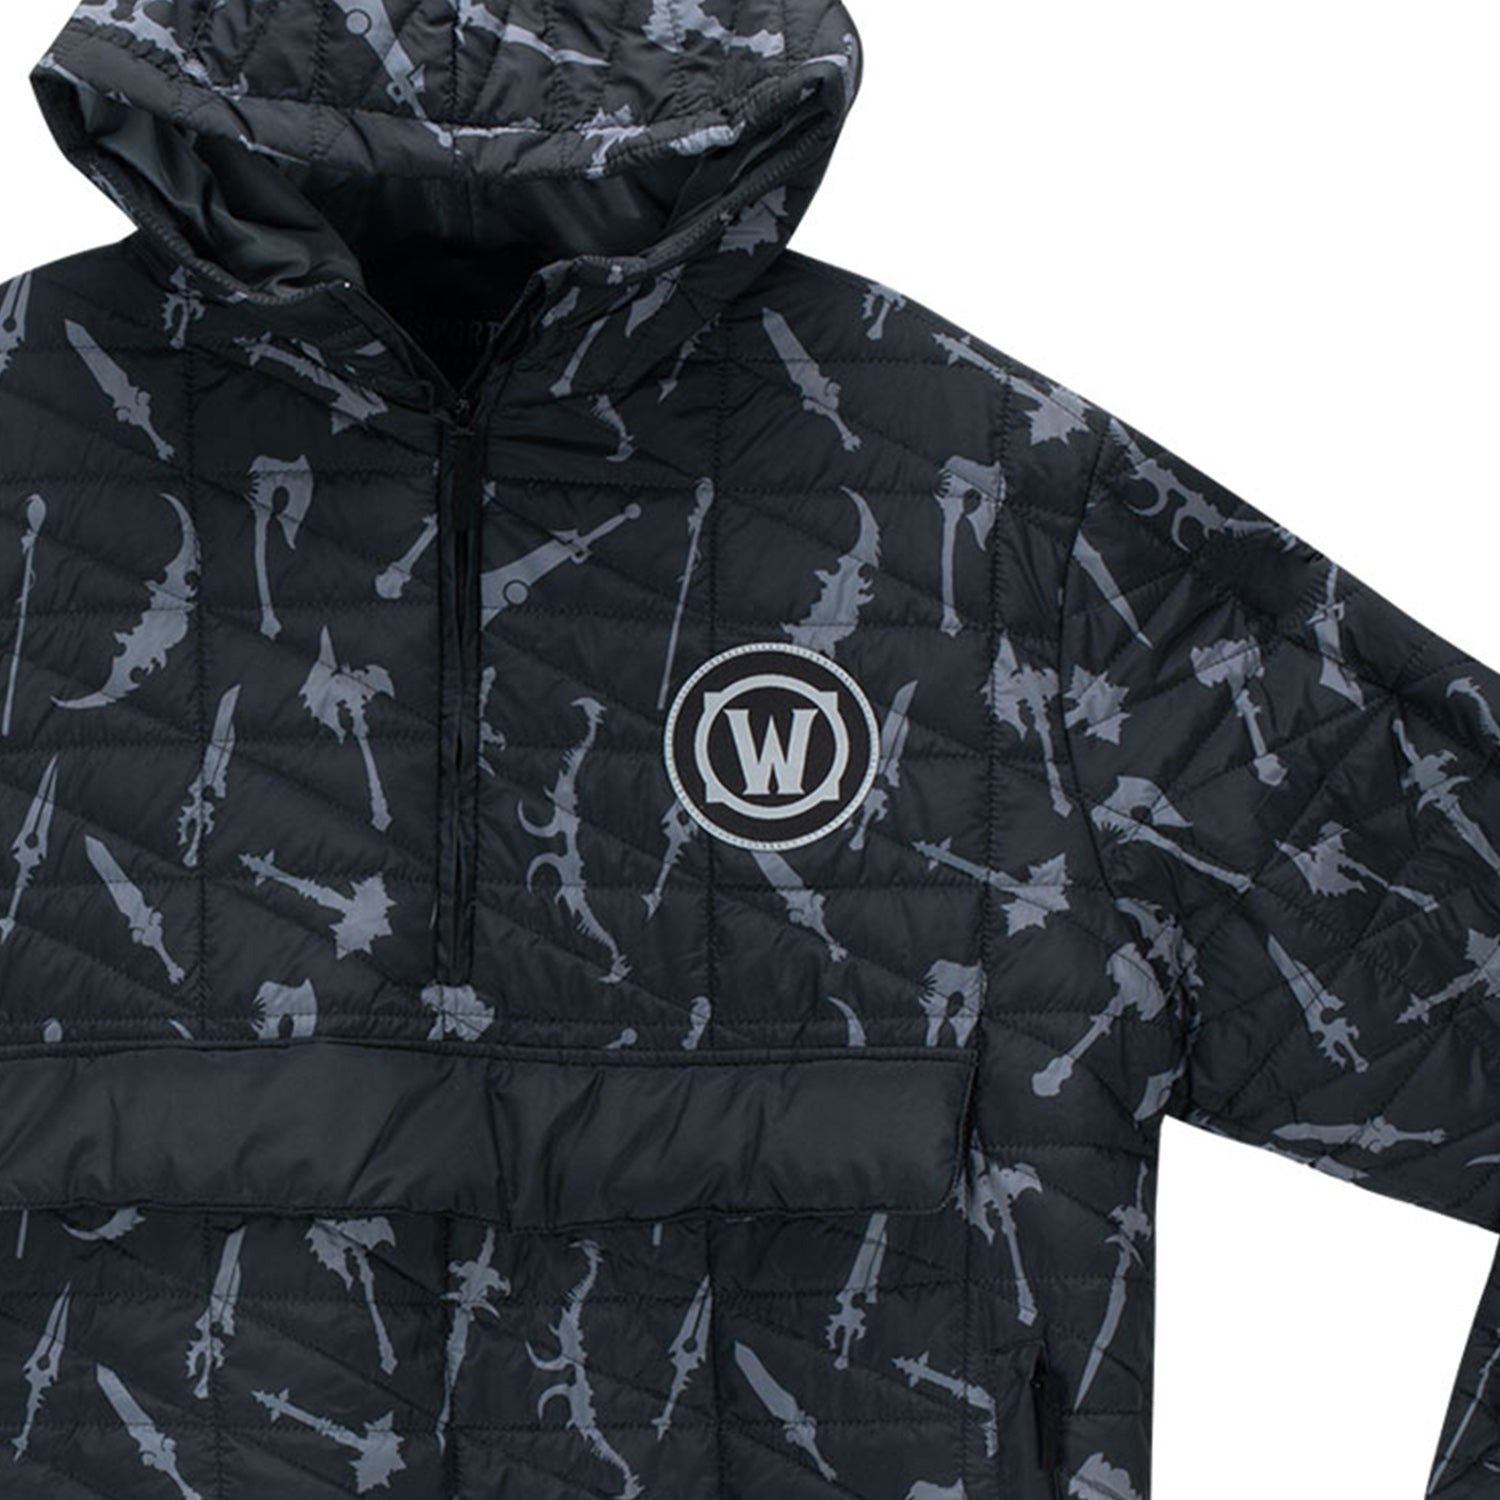 World of Warcraft Weapons Half-Zip Pullover Jacket - Front Close Up View